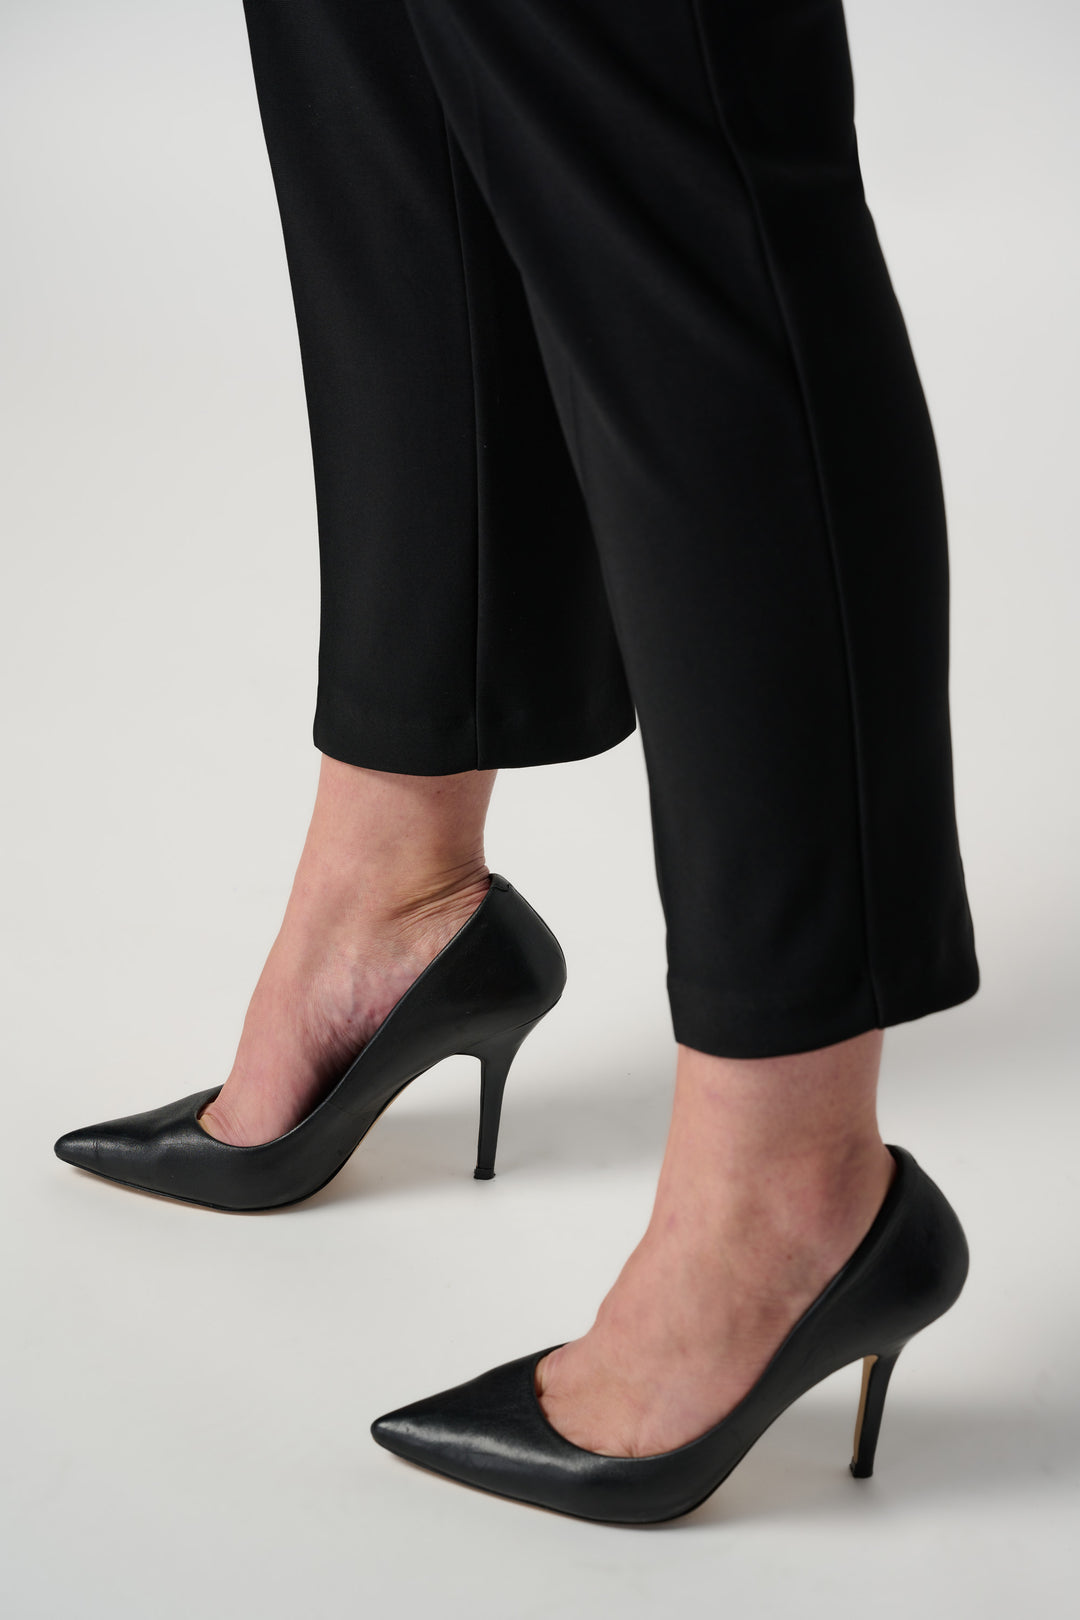 JOSEPH RIBKOFF  STYLE #181089 - 06/JC14 women's business casual cropped ankle dress pant  -black detail